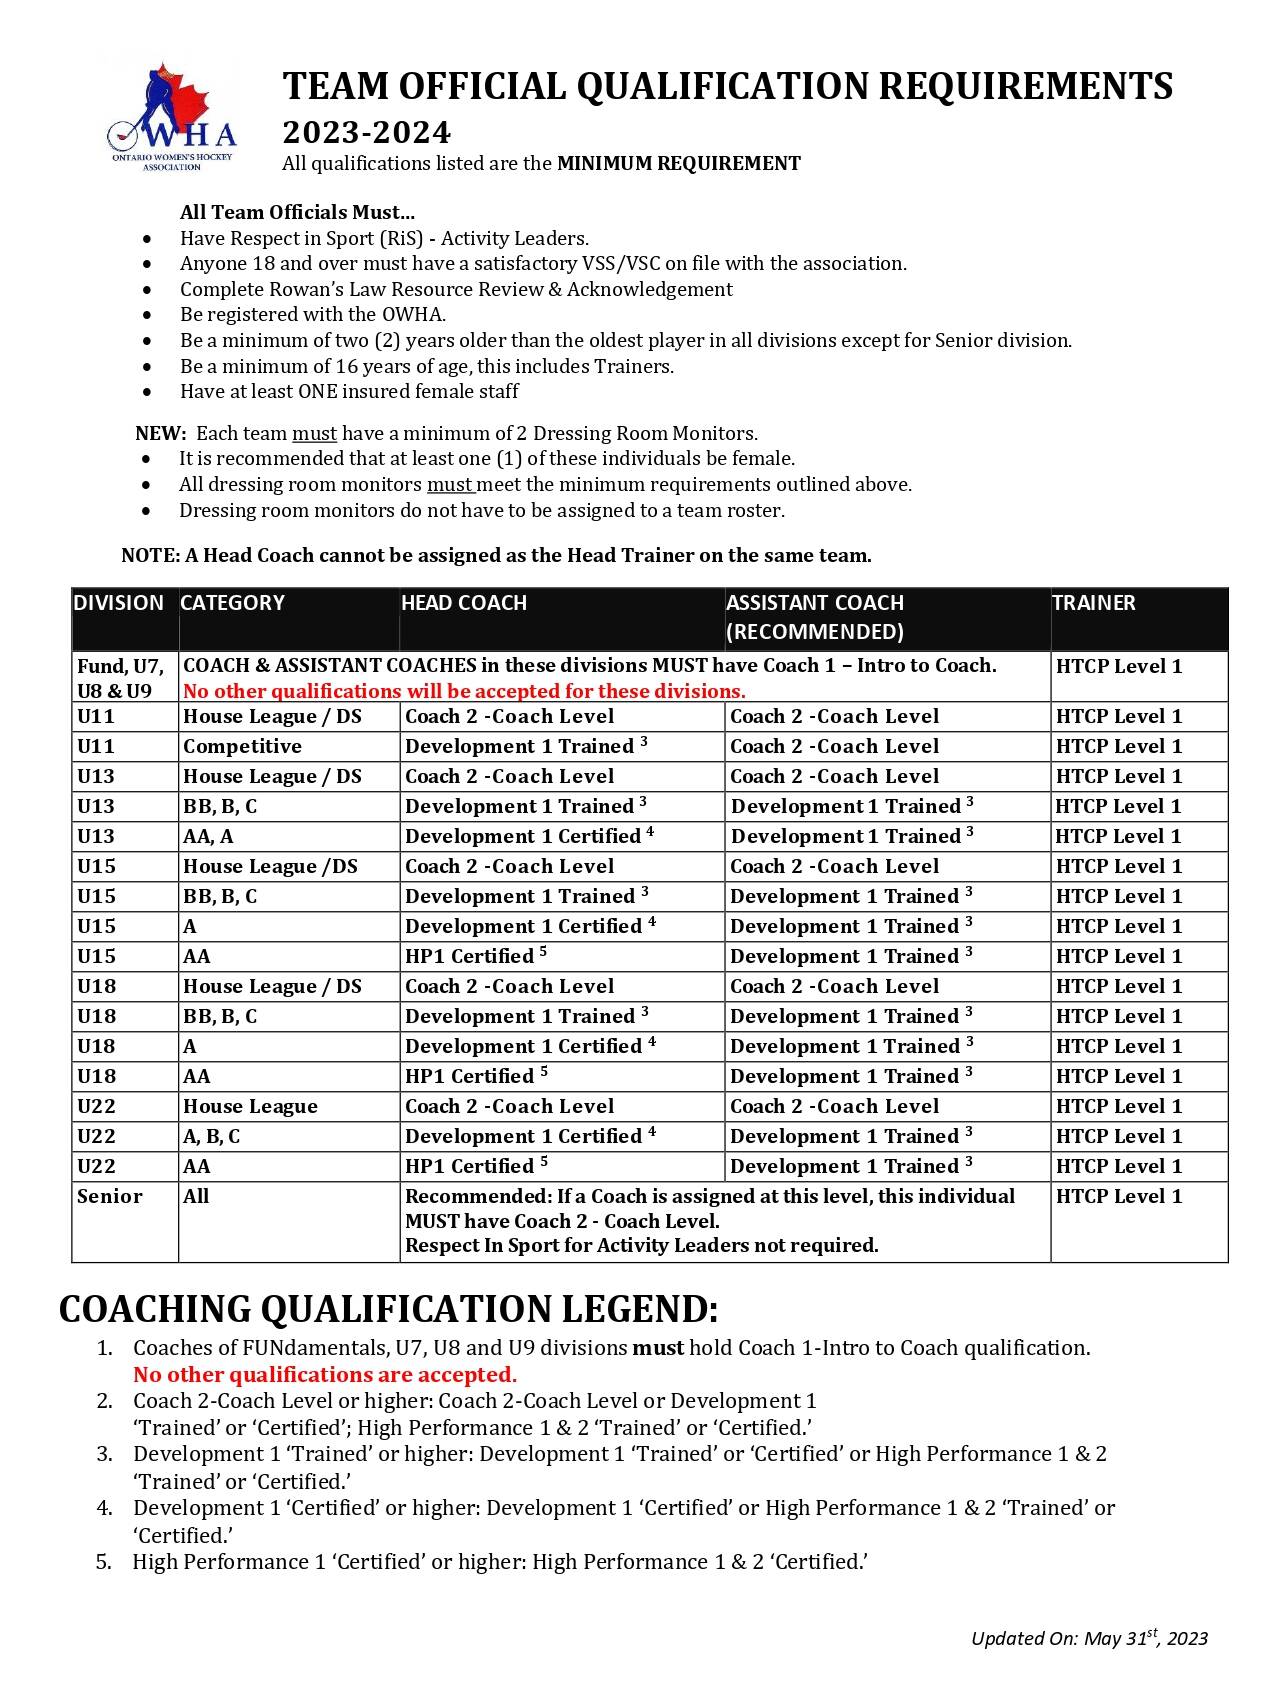 Qualifications_Requirement_(23-24_season)_page-0001.jpg